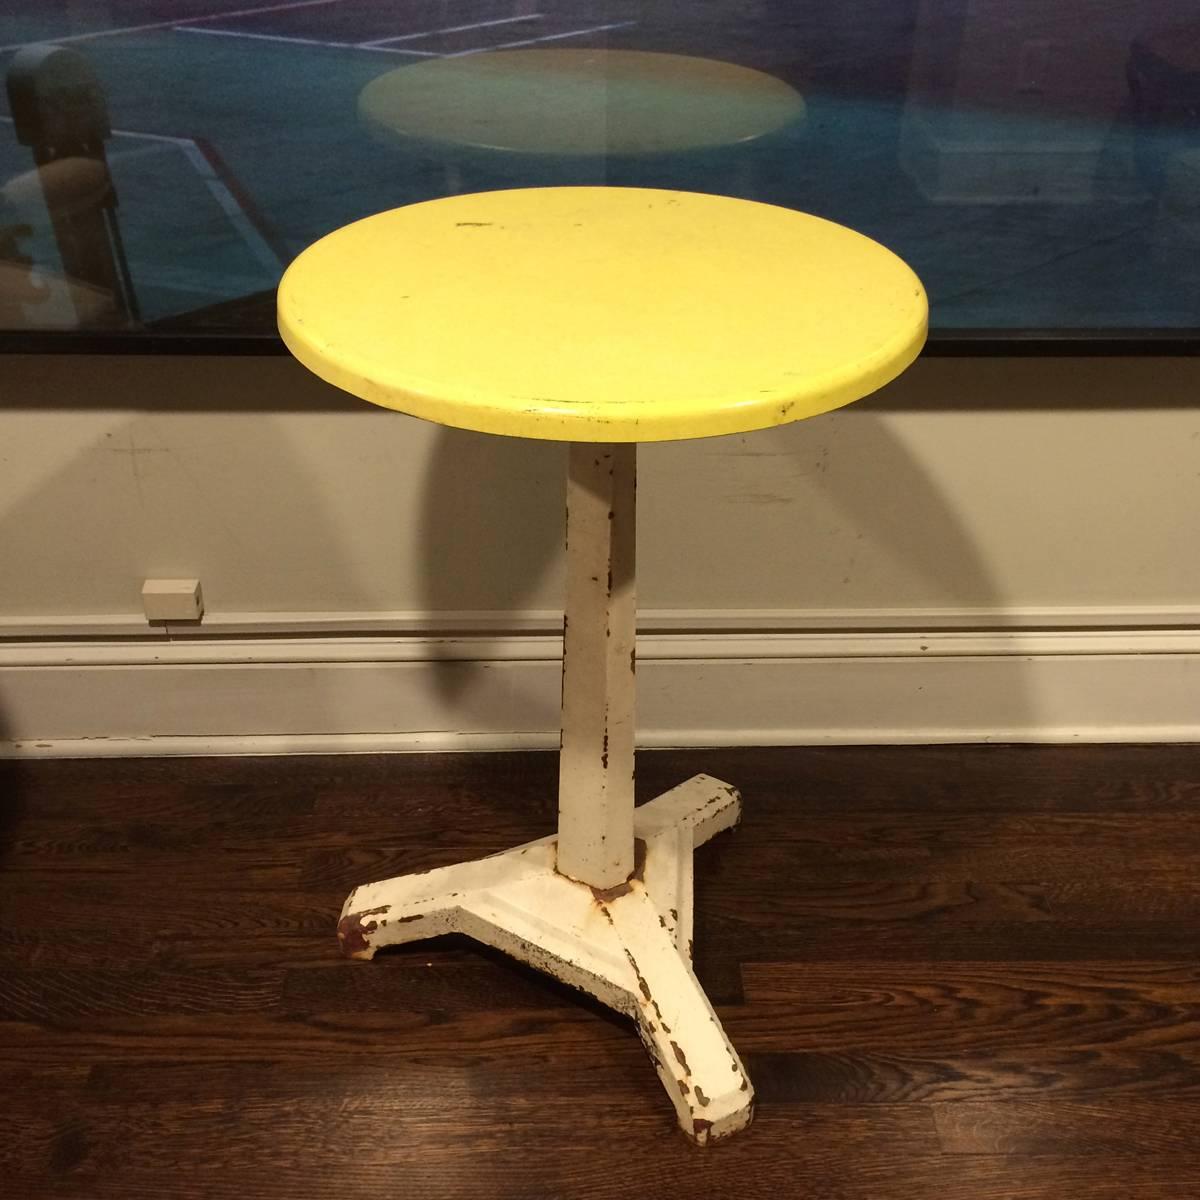 Early 20th century small gueridon or bistro table that may be used in an indoor or outdoor setting like a patio or terrace. The flexible size is great for dining, kitchen, end or center table. The substantial yellow bakelite top is attached to a